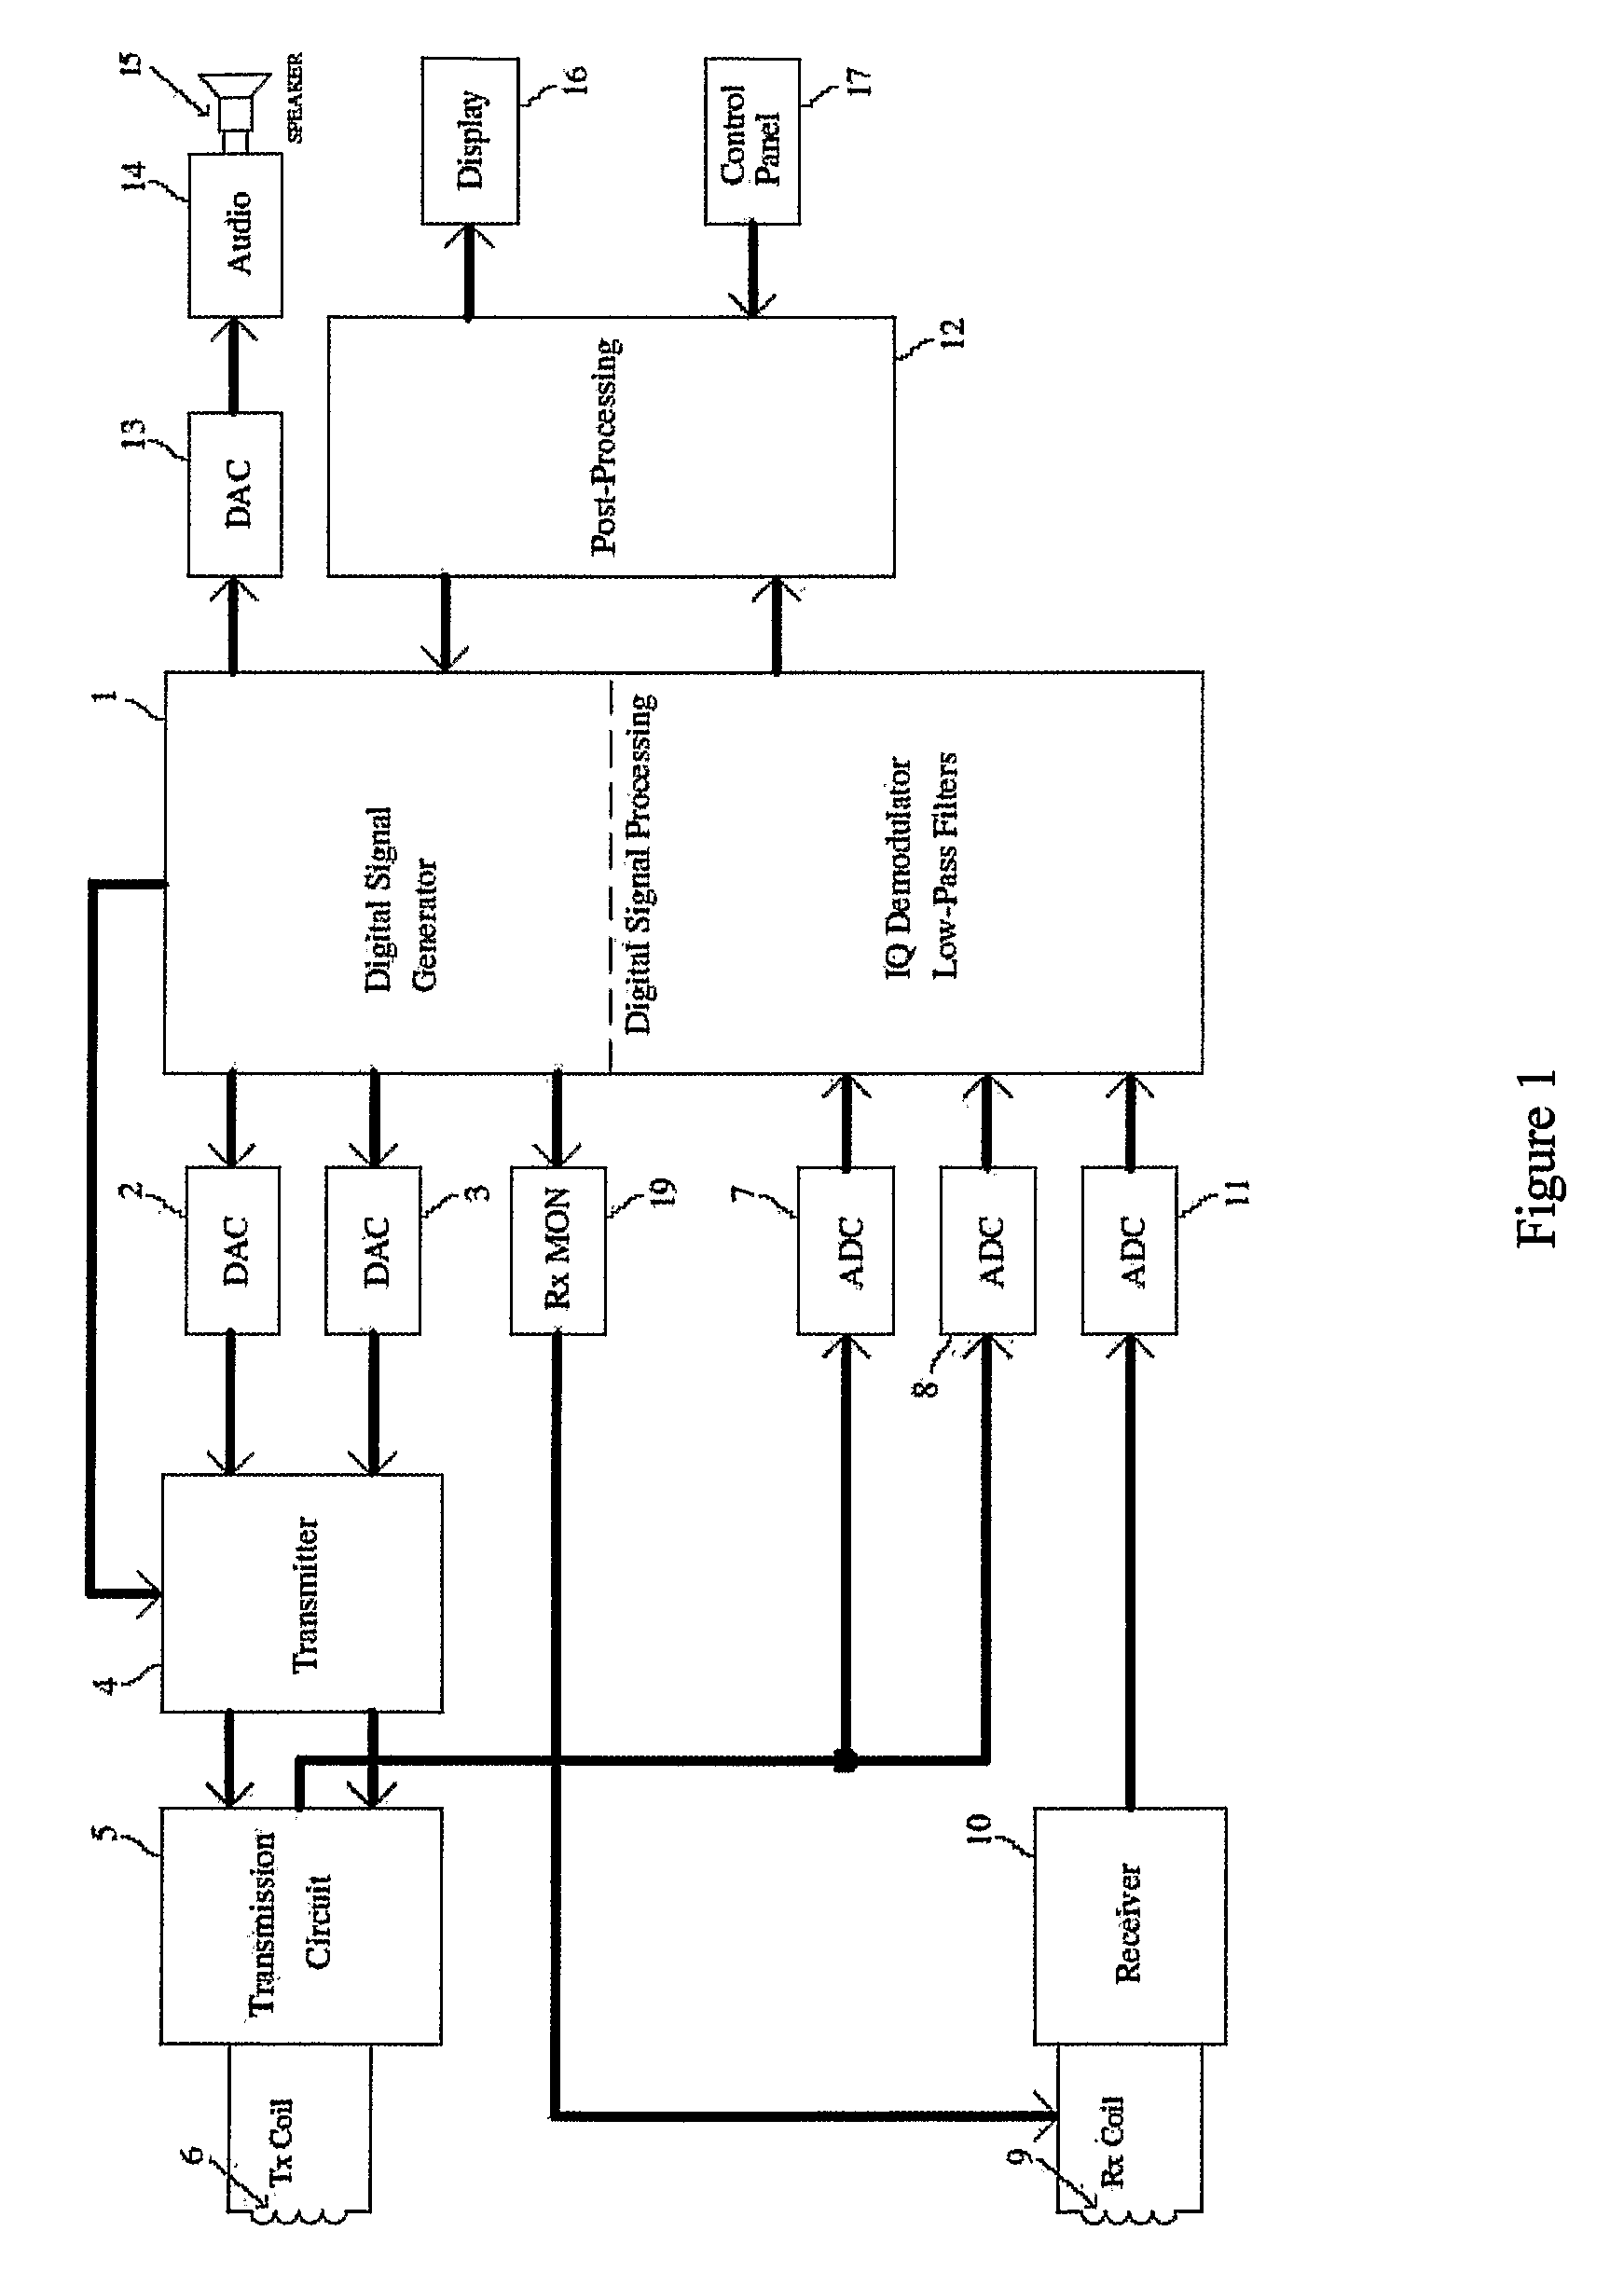 Method and Apparatus for Metal Detection Employing Digital Signal Processing